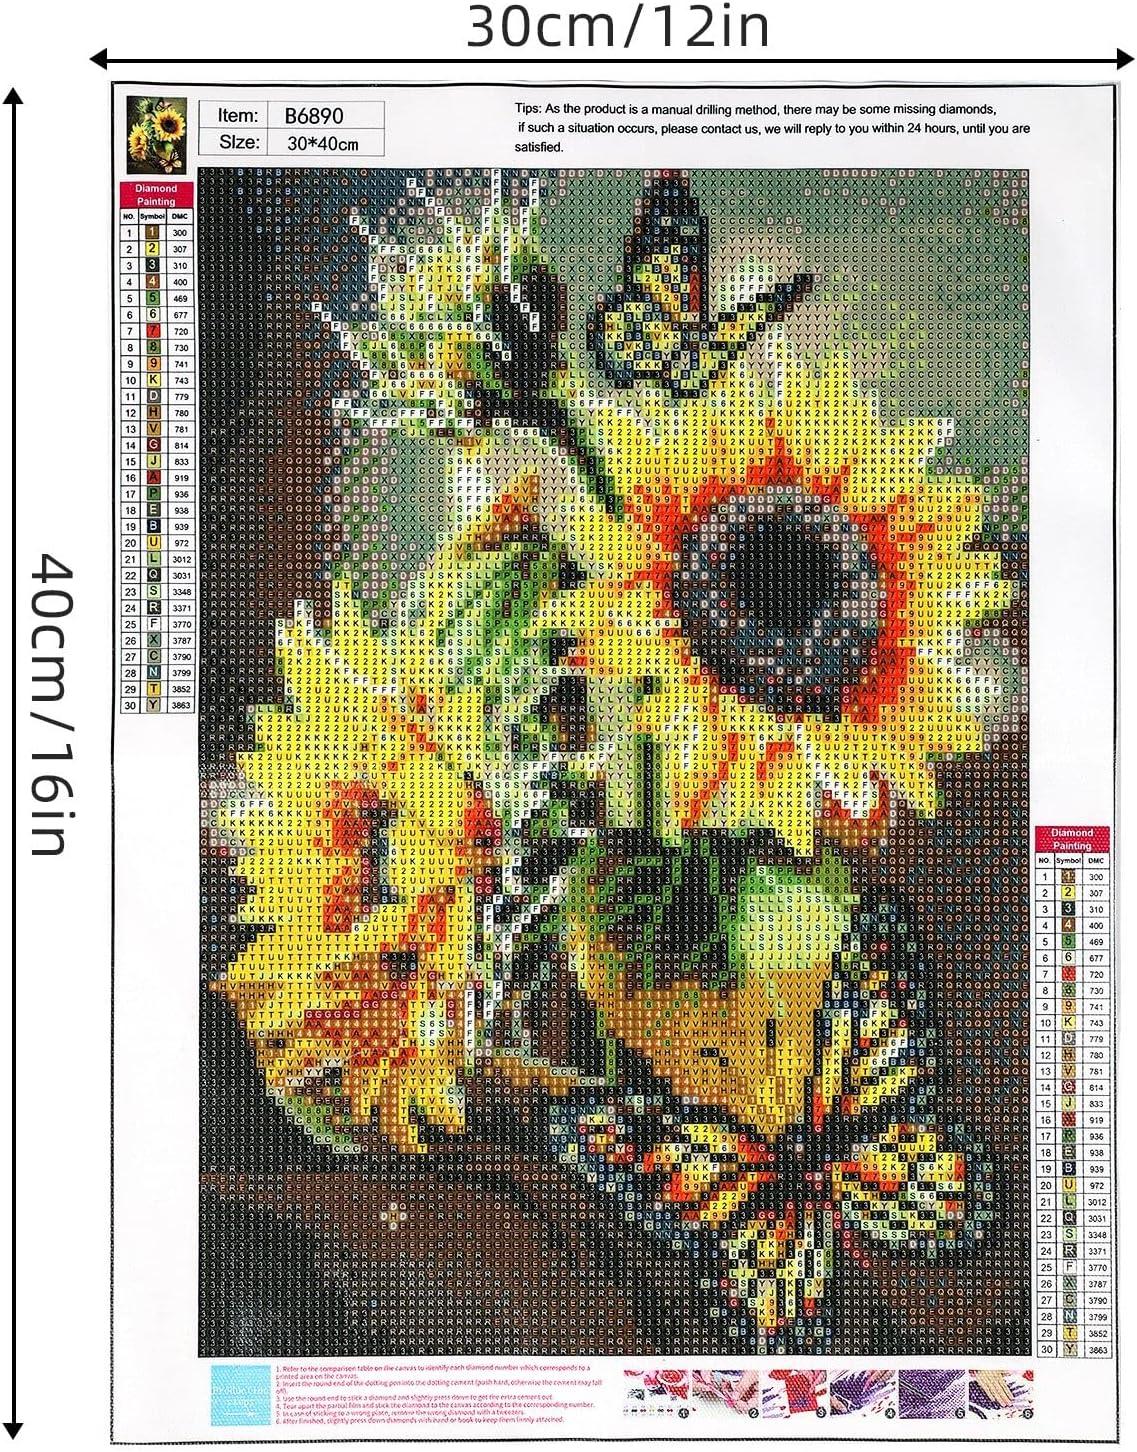 Flowers Butterfly Diamond Painting Kits for Adults Beginners 12 X 16 Inch